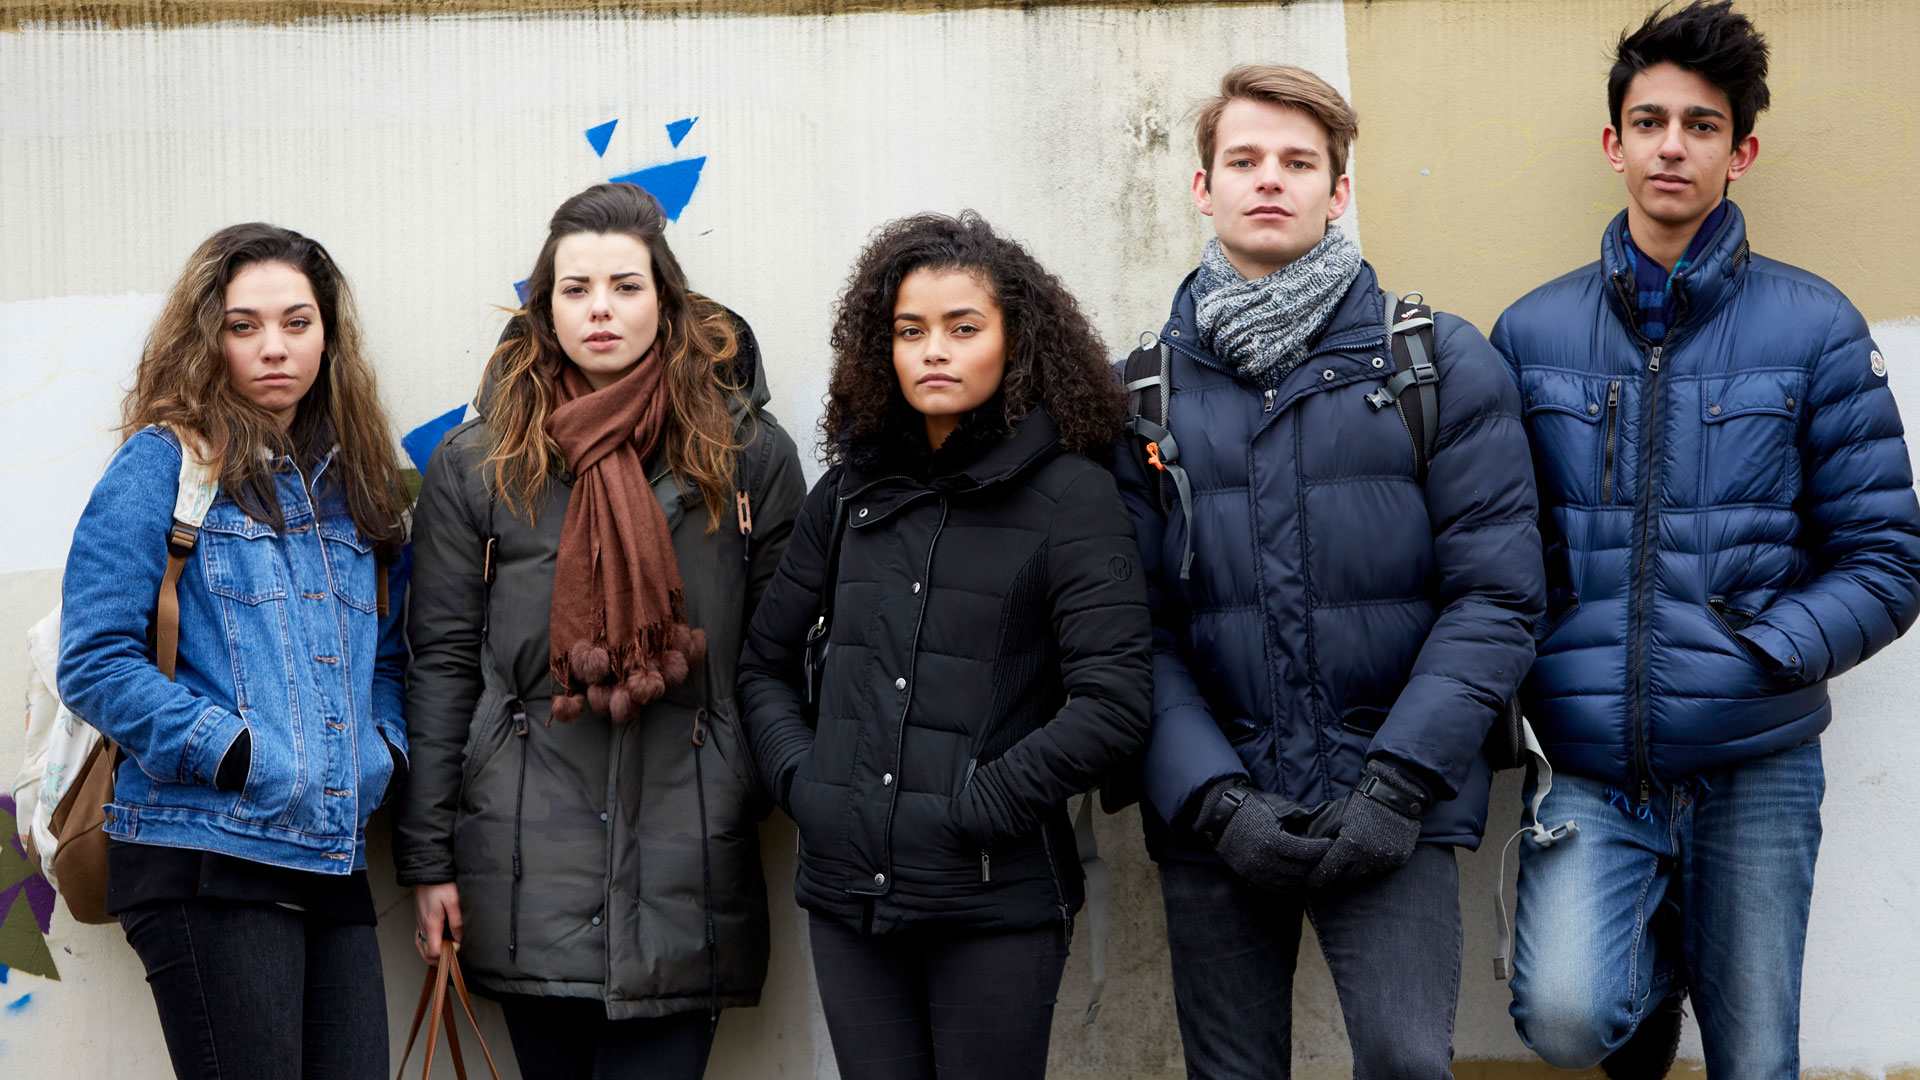 group-of-five-young-people-wearing-jackets-standing-against-the-wall-looking-in-front-of-the-camera